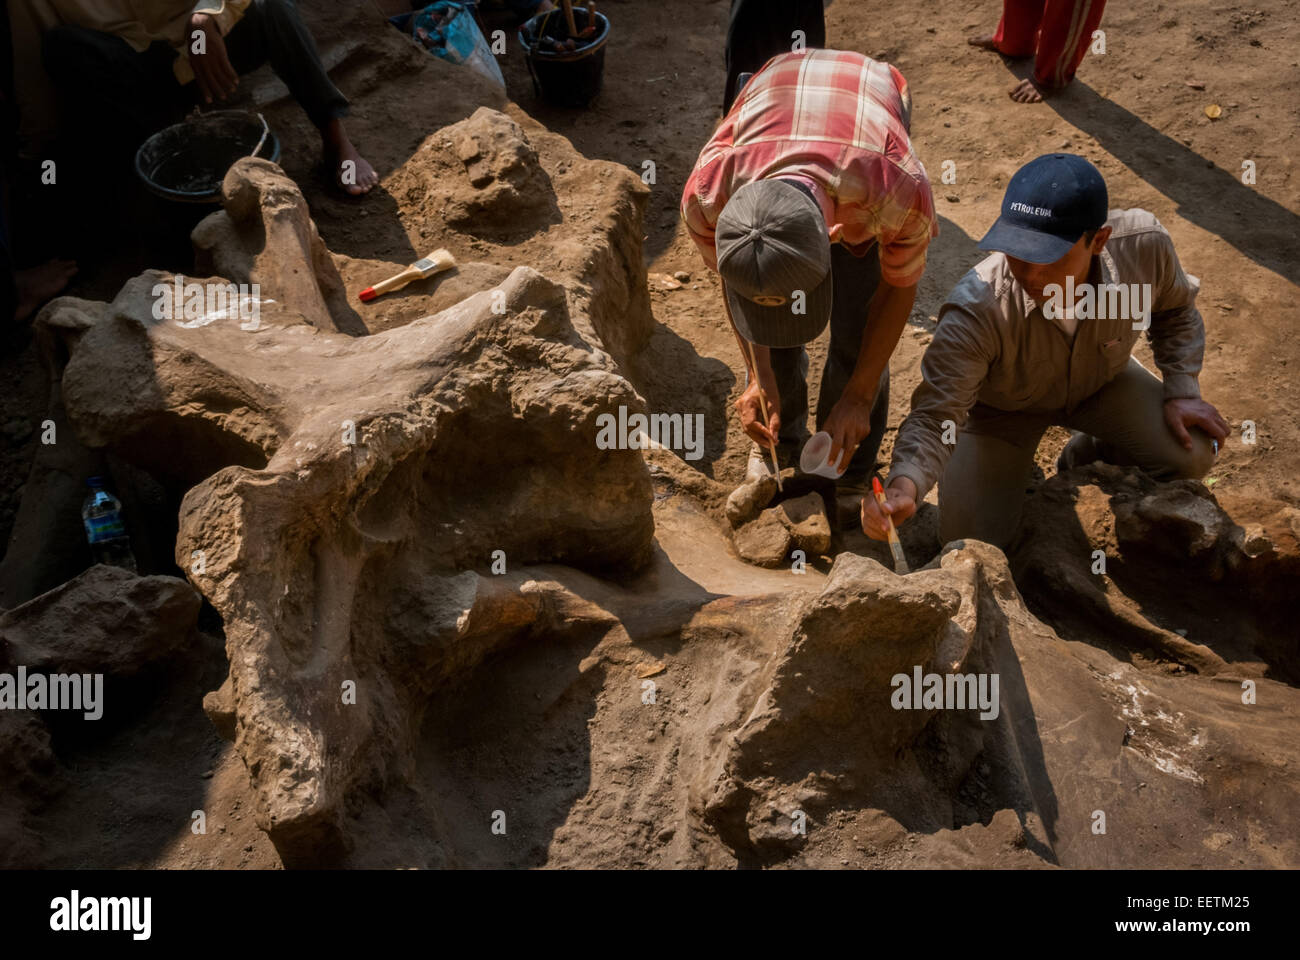 Paleontologists working on the fossilized bones of Elephas hysudrindicus, an extinct elephant species lived during Pleistocene epoch, in Indonesia. Stock Photo